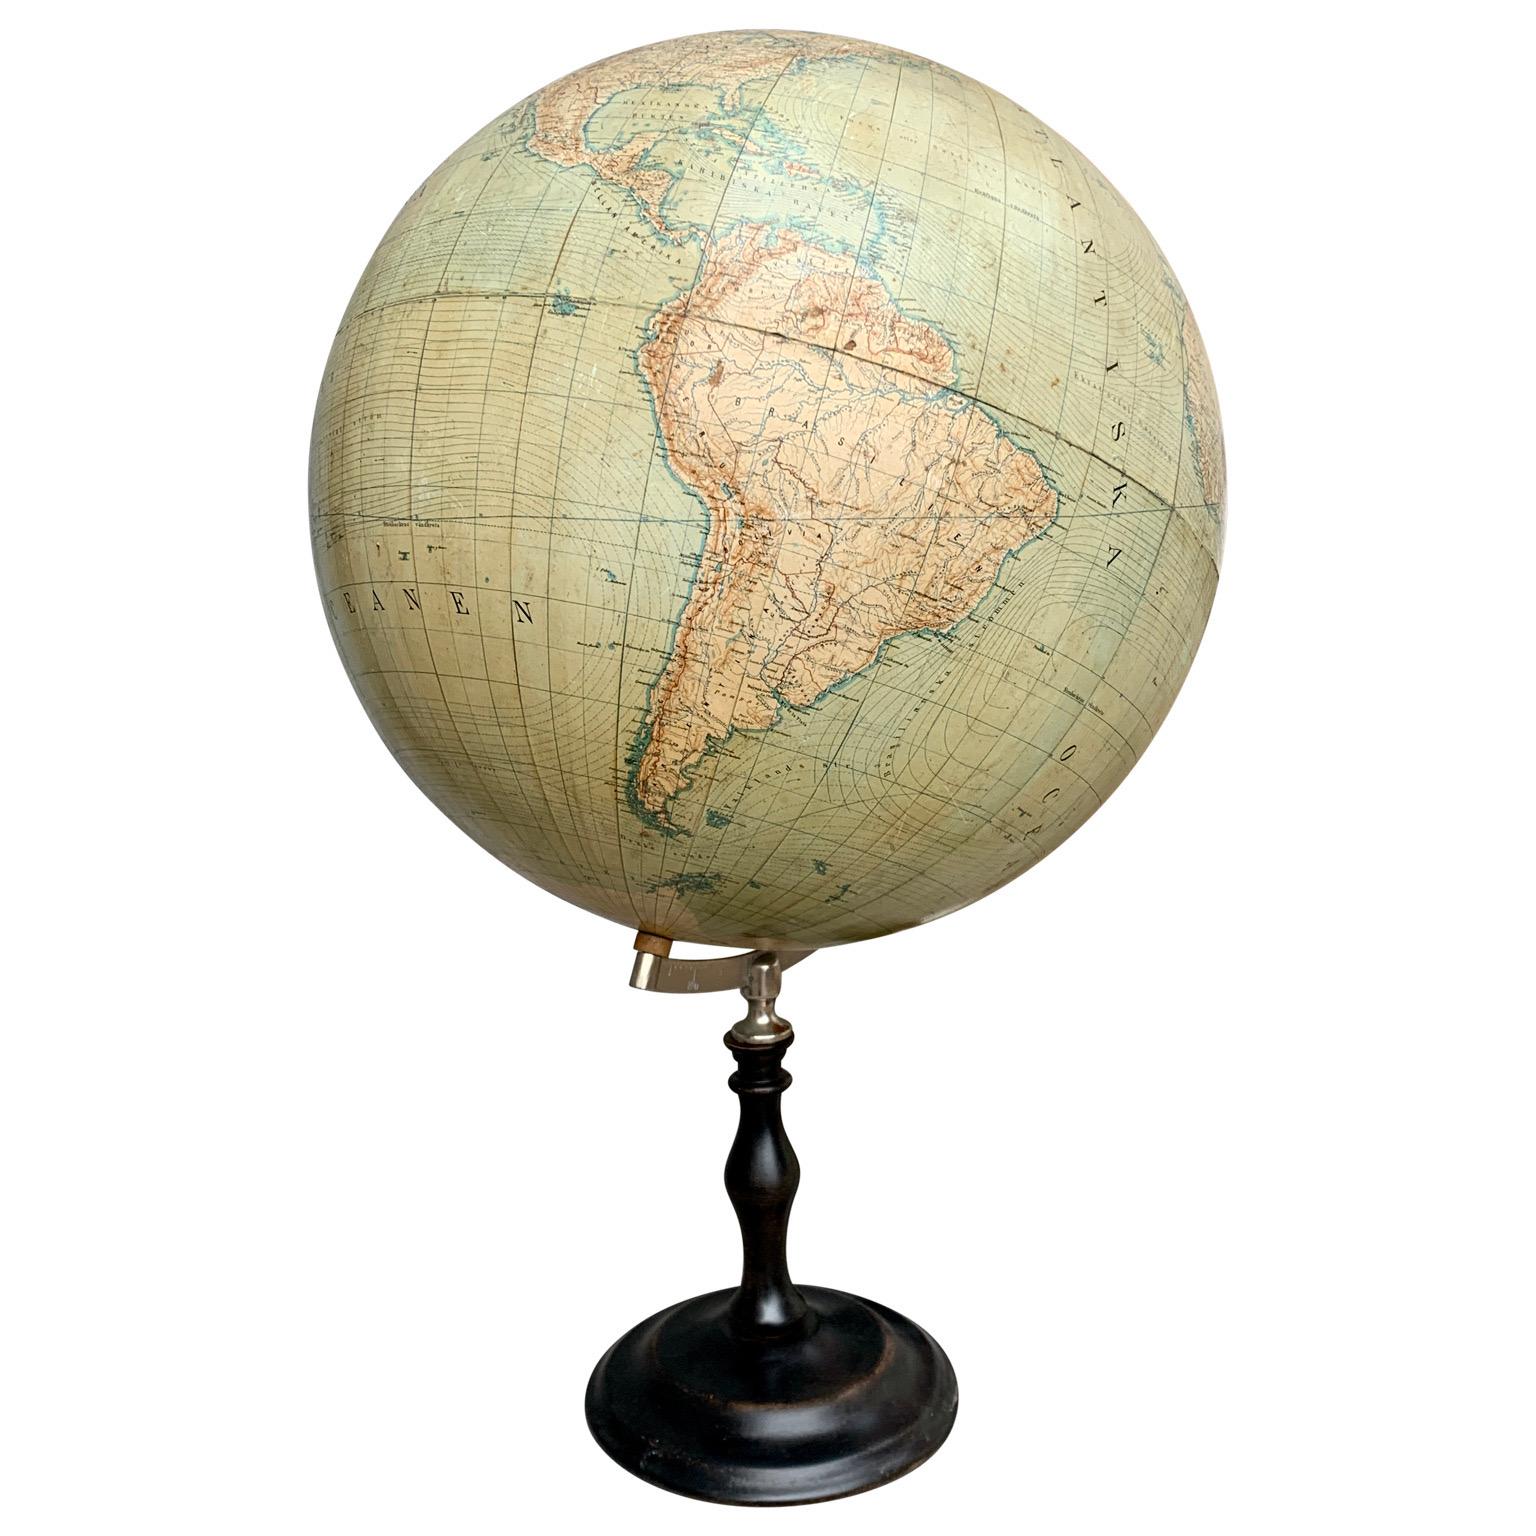 A large Swedish globe from 1911 by H. Kiepert, Swedish version by 